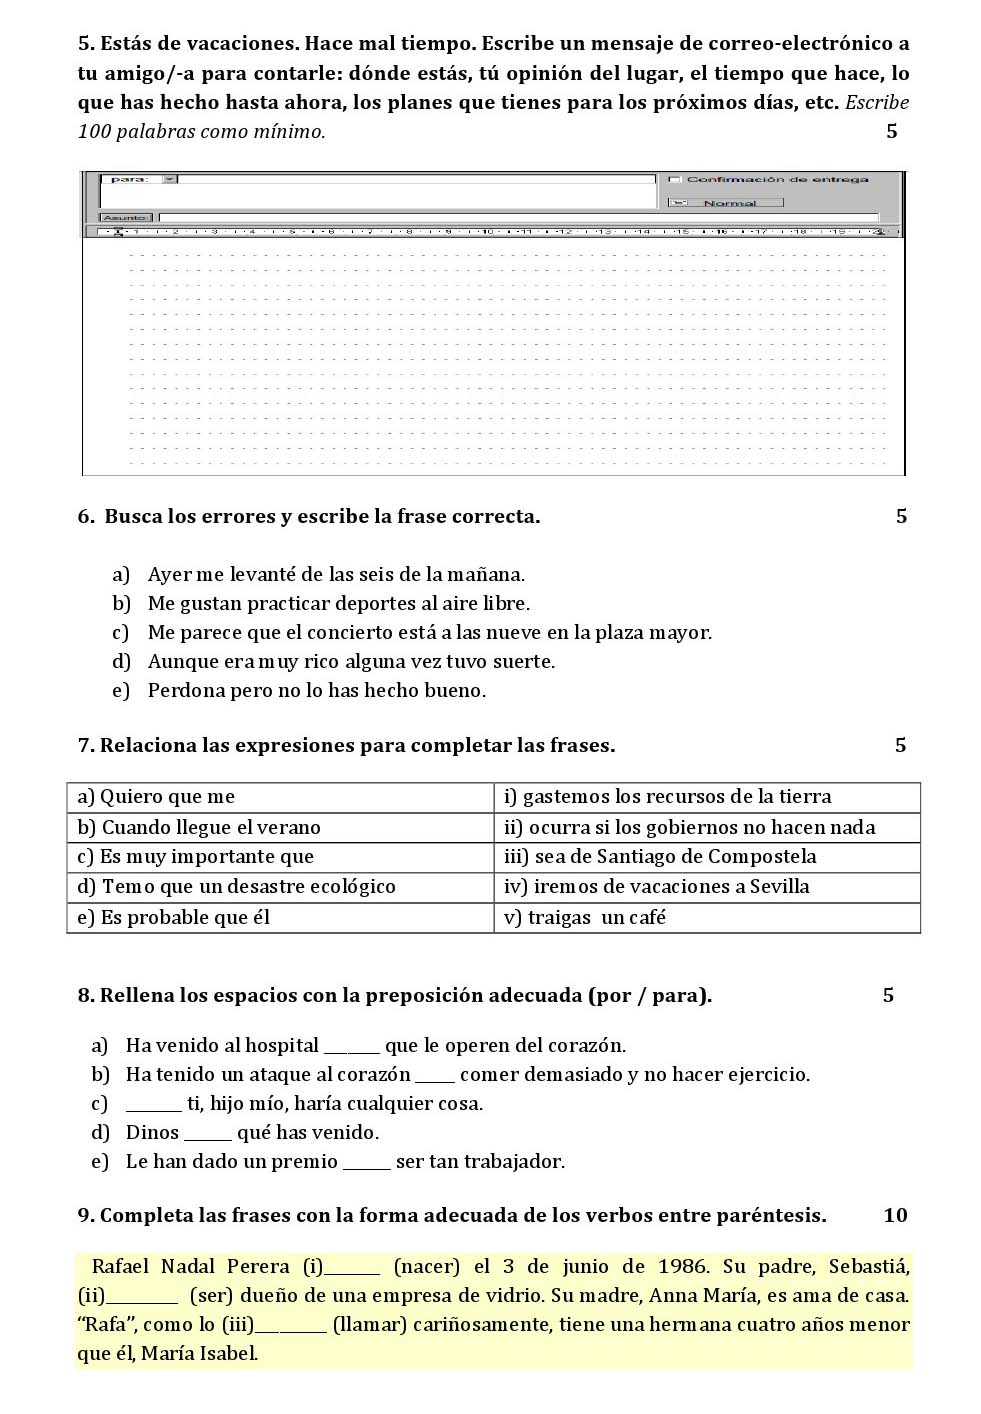 Spanish CBSE Class X Sample Question Paper 2018-19 - Image 3